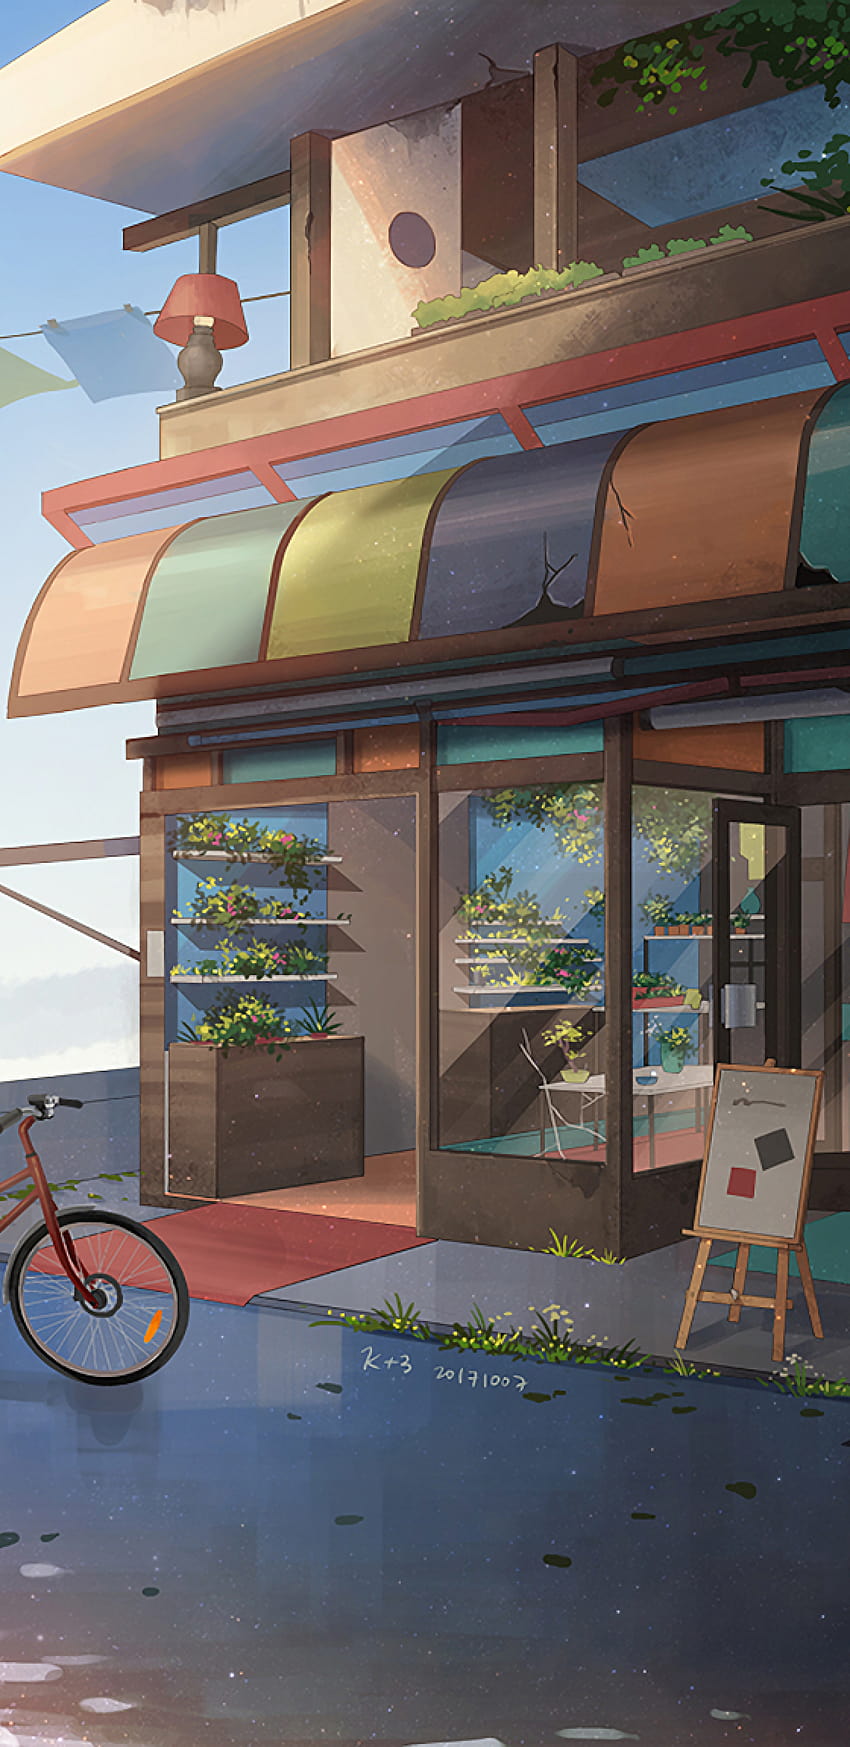 1440x2960 Anime Cafe, Boy, Fox, Scenic, Building for Samsung Galaxy S9, Note 9, S8, S8+, Google Pixel 3 XL HD phone wallpaper